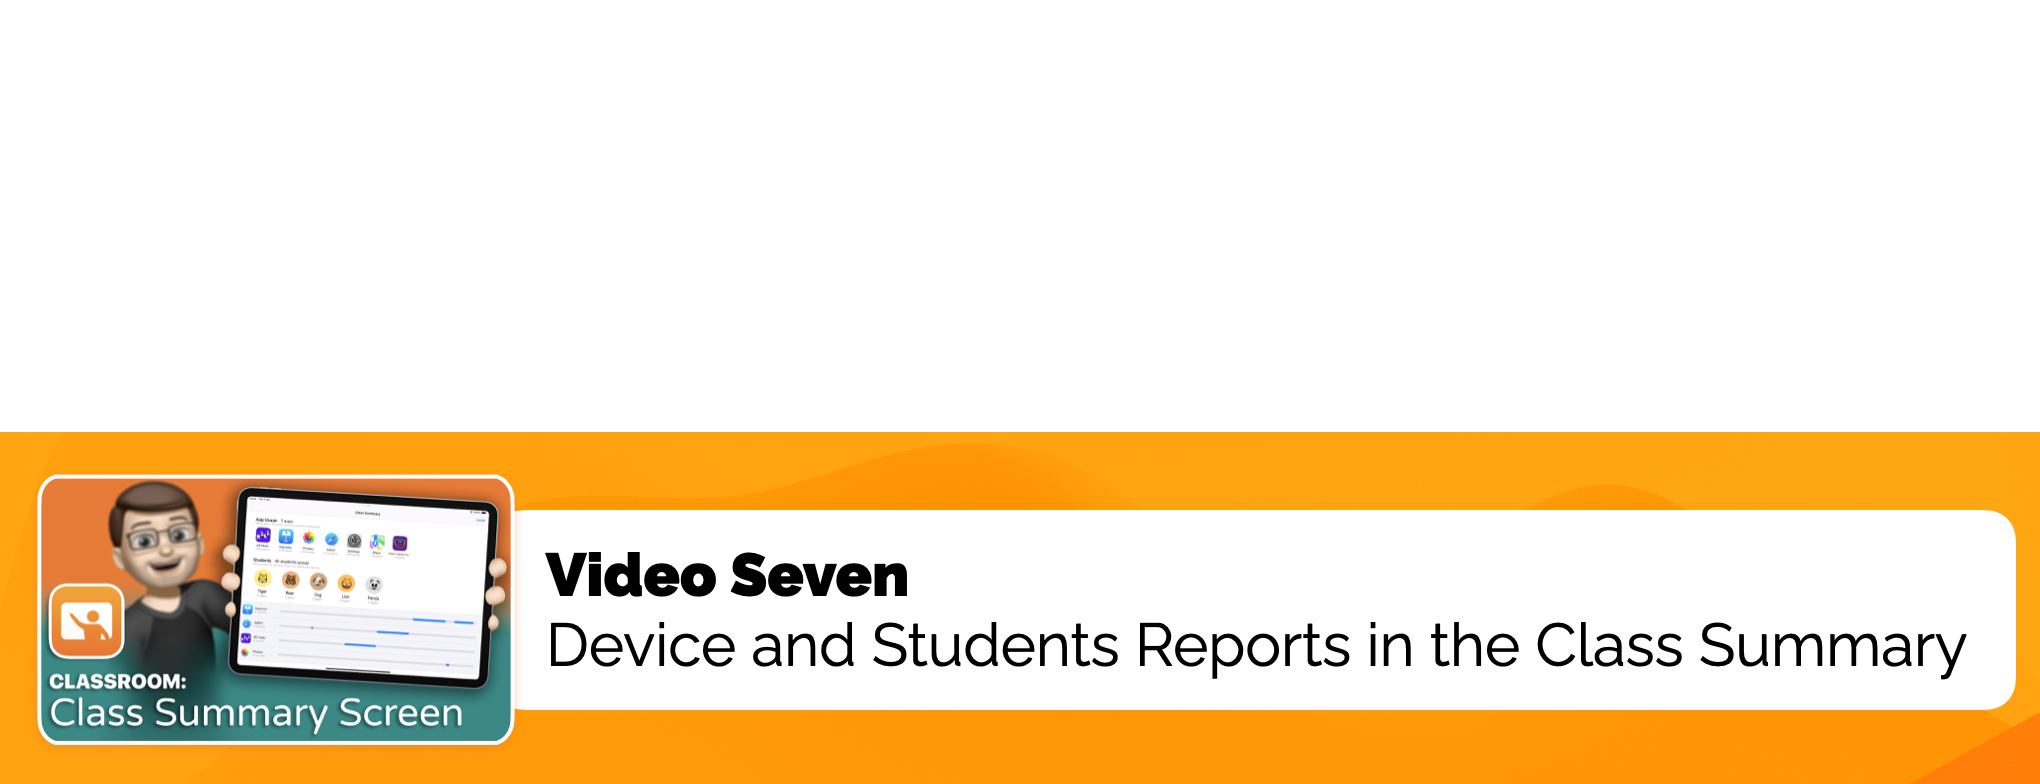 Video Seven: Device and Students Reports on the Class Summary Screen in Classroom